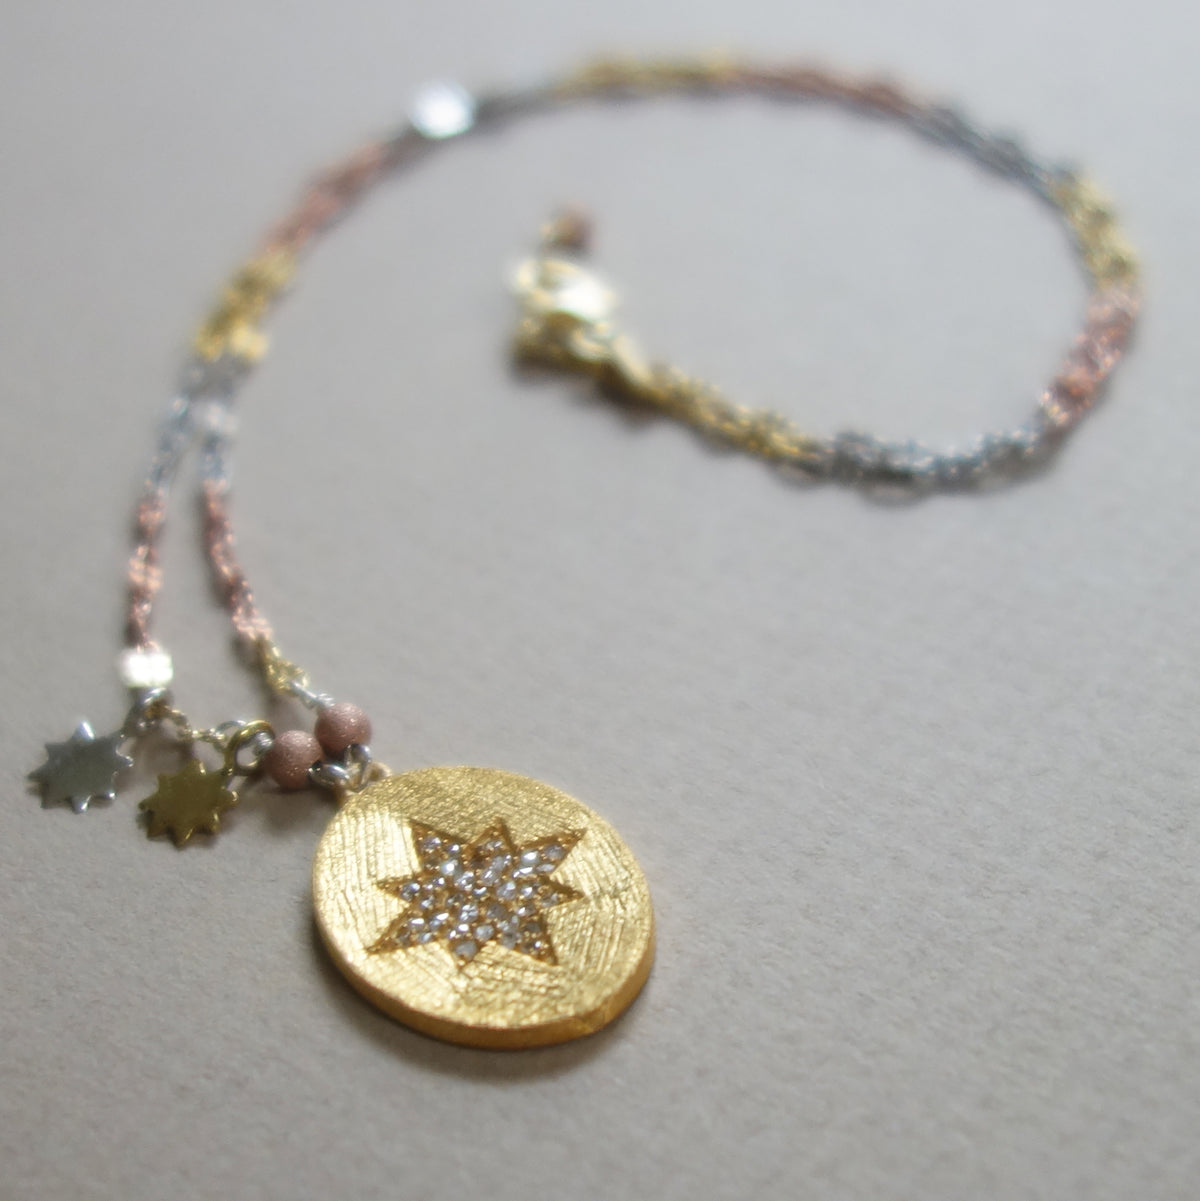 Diamonds in the Sun: brushed gold pendant necklace